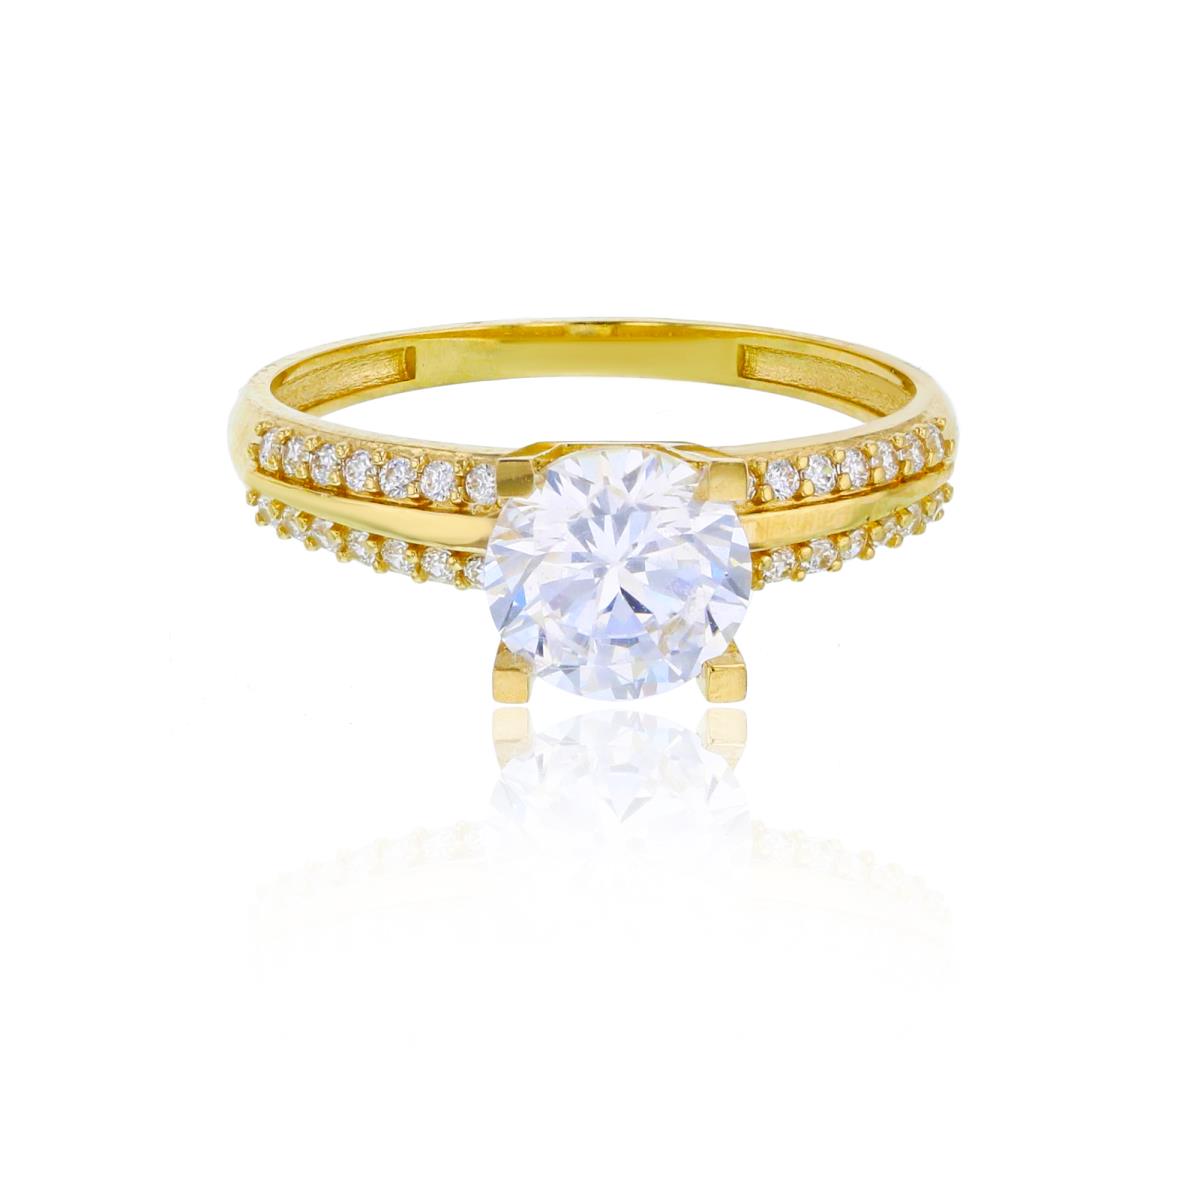 10K Yellow Gold 7mm Round Cut CZ Paved Sides Engagement Ring